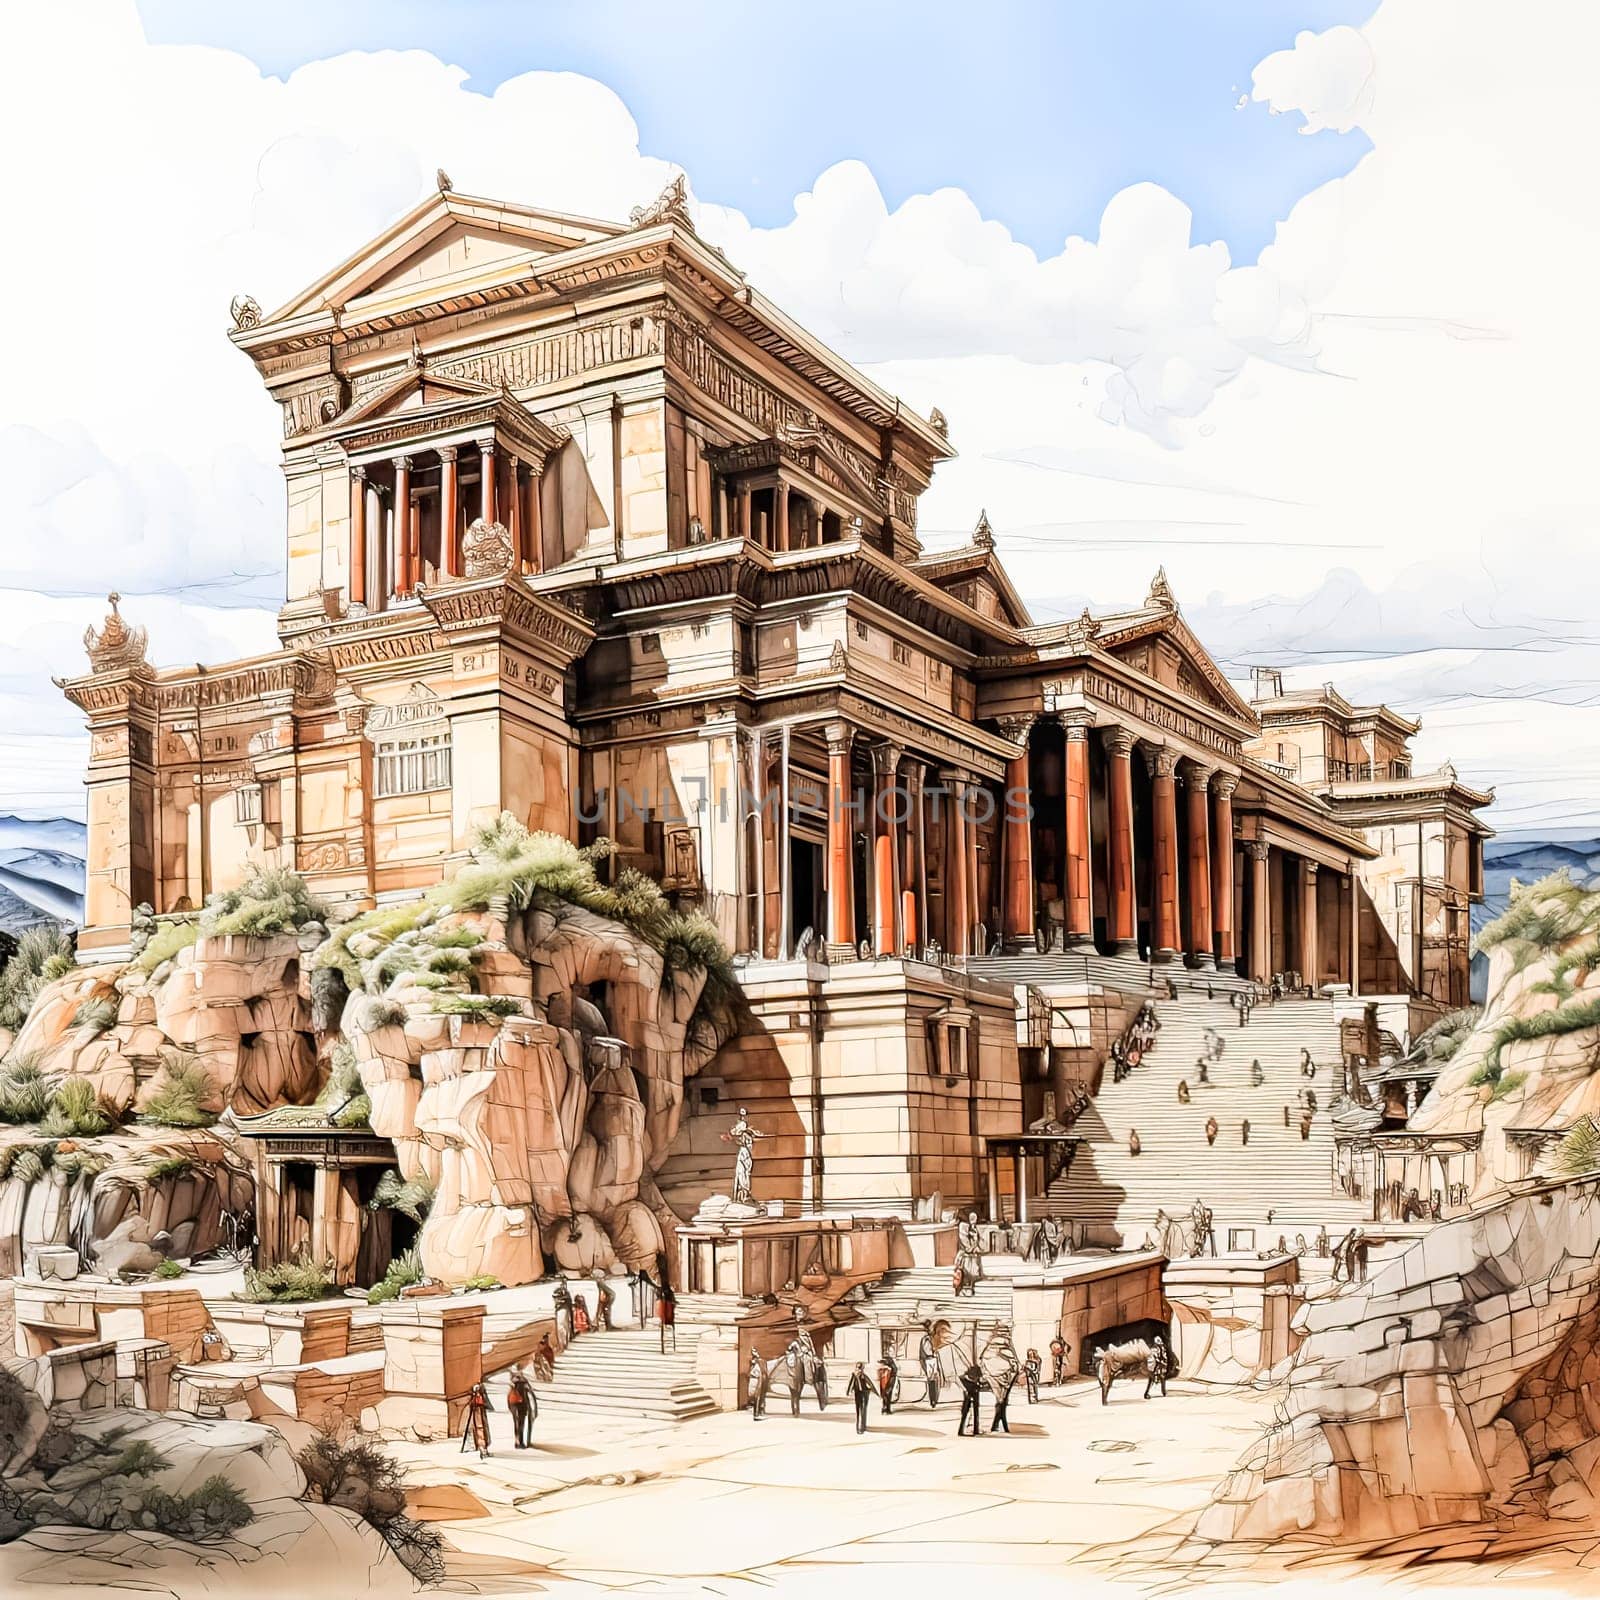 Watercolor artwork showcases an ancient Greek style temple, an expression of architectural artistry by Alla_Morozova93